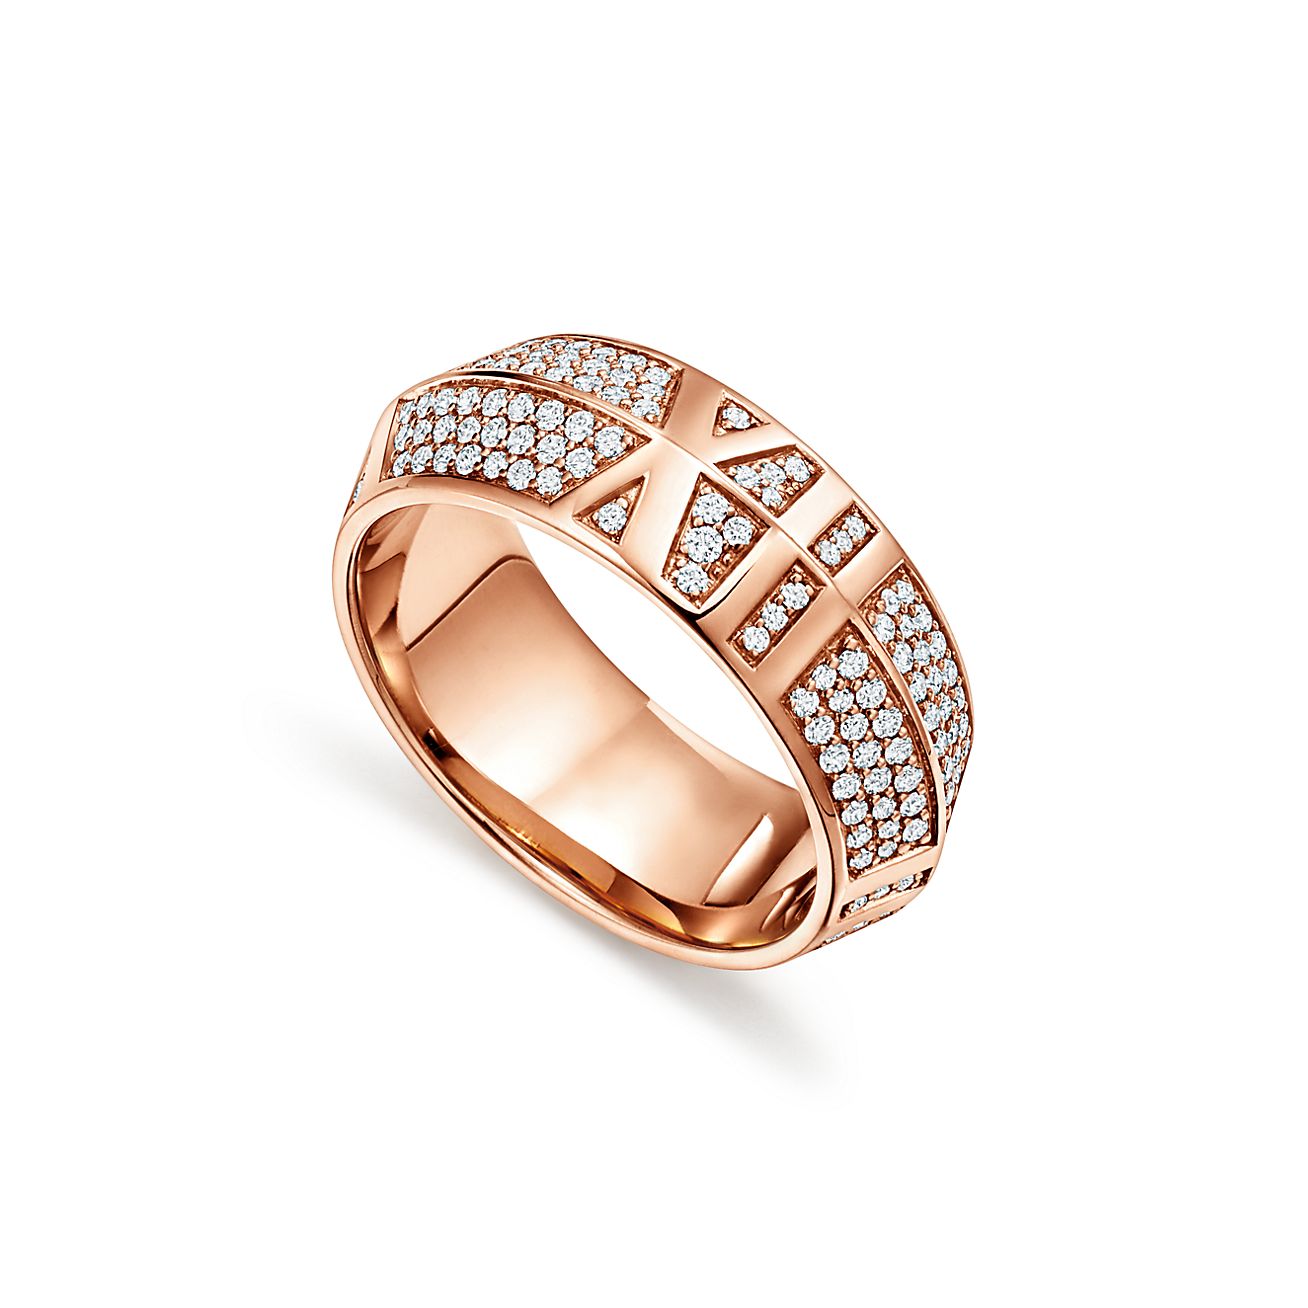 Atlas™ X Closed Wide Ring in Rose Gold with Pavé Diamonds, 7.5 mm 